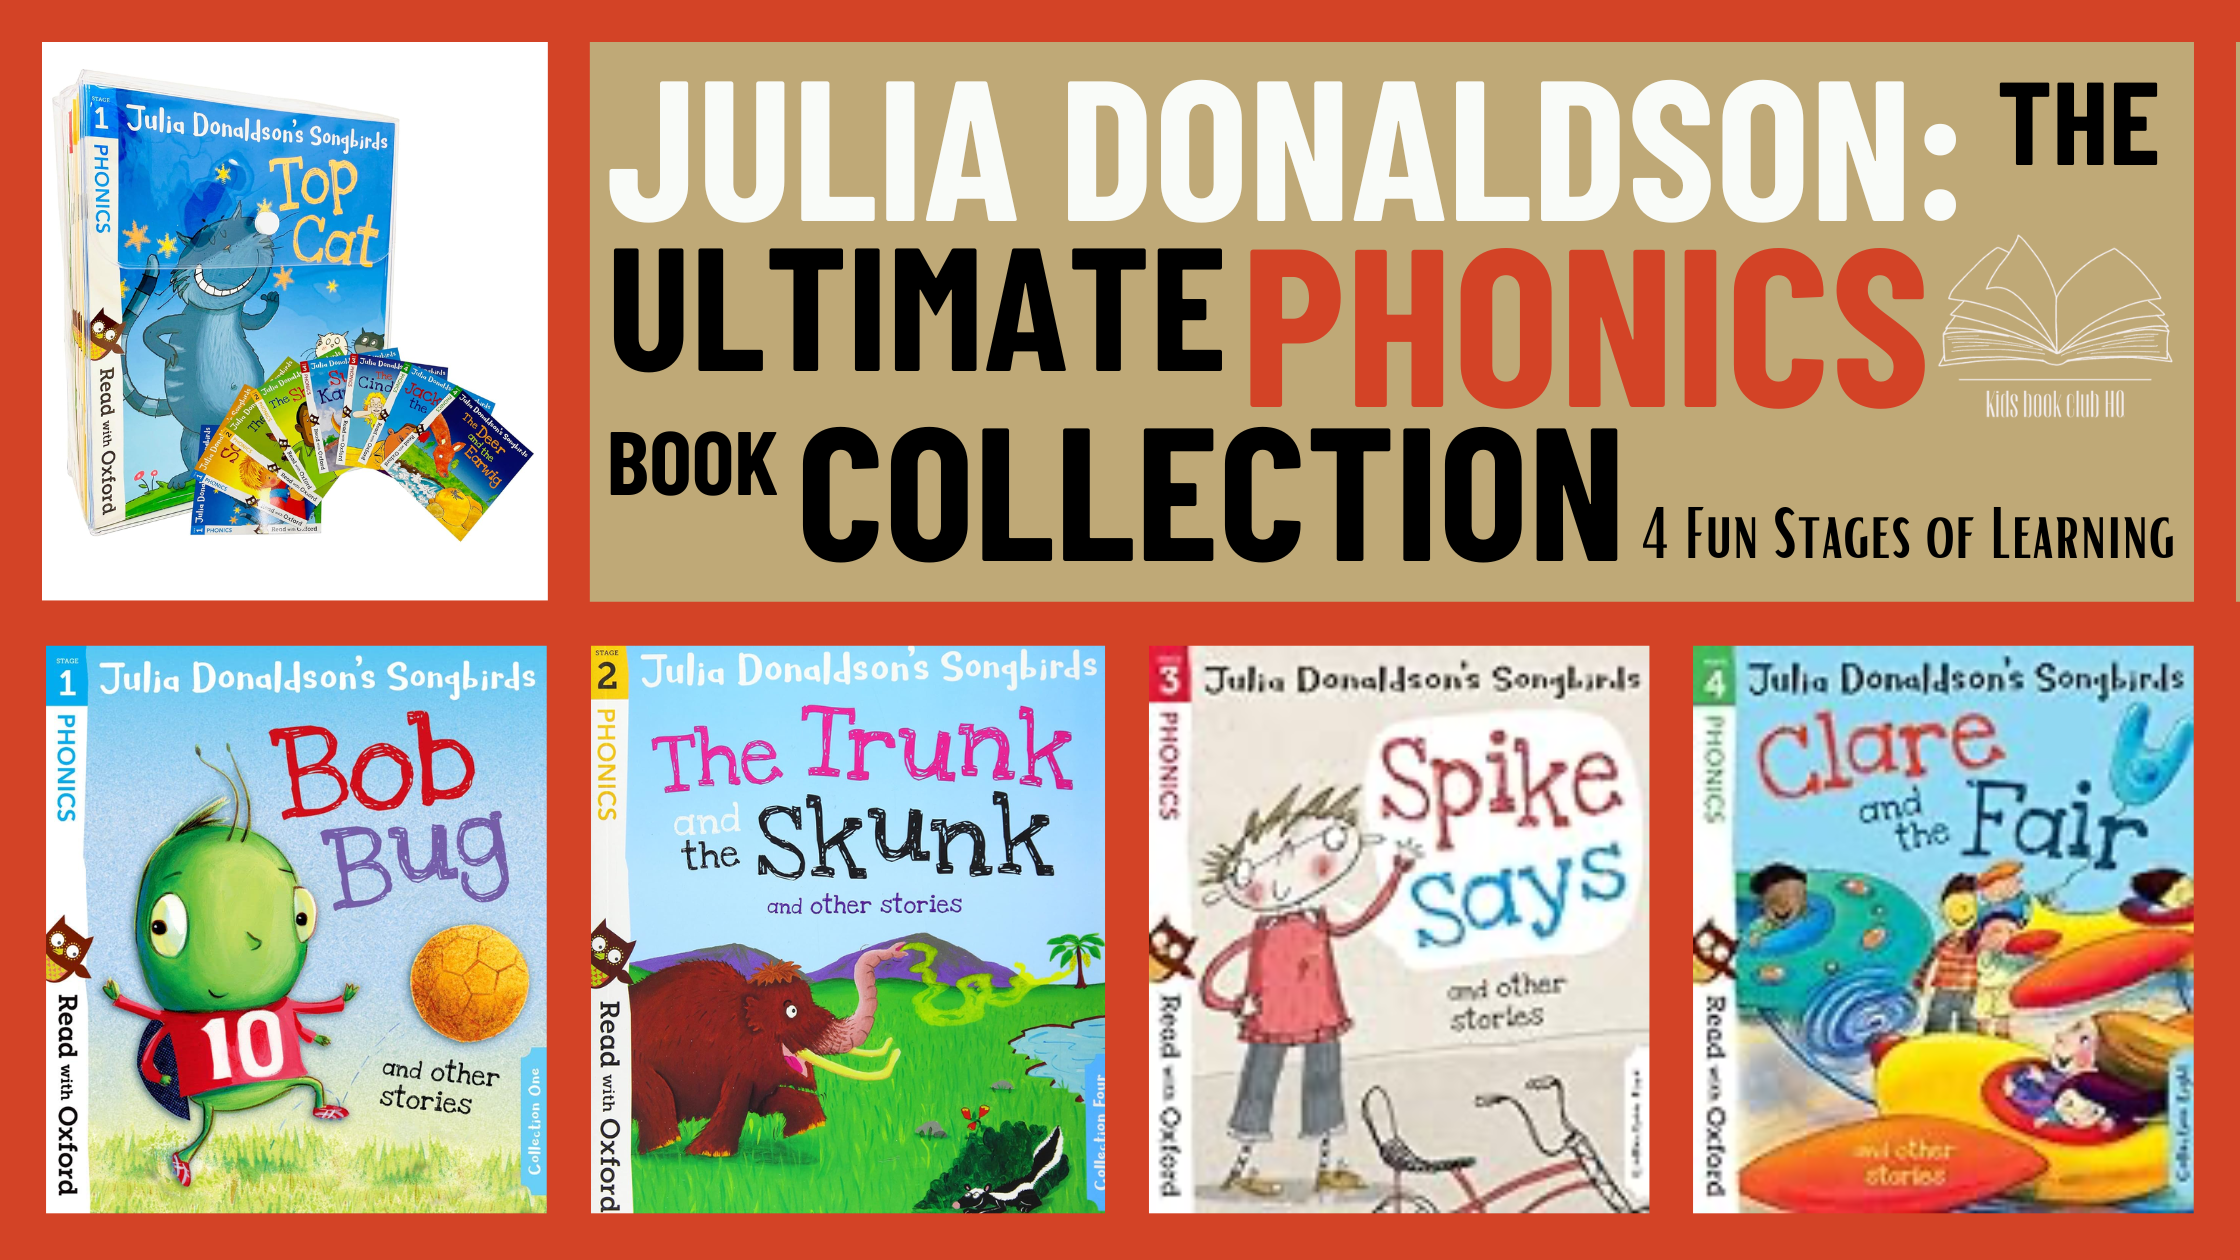 Julia Donaldson: the Ultimate phonics book collection